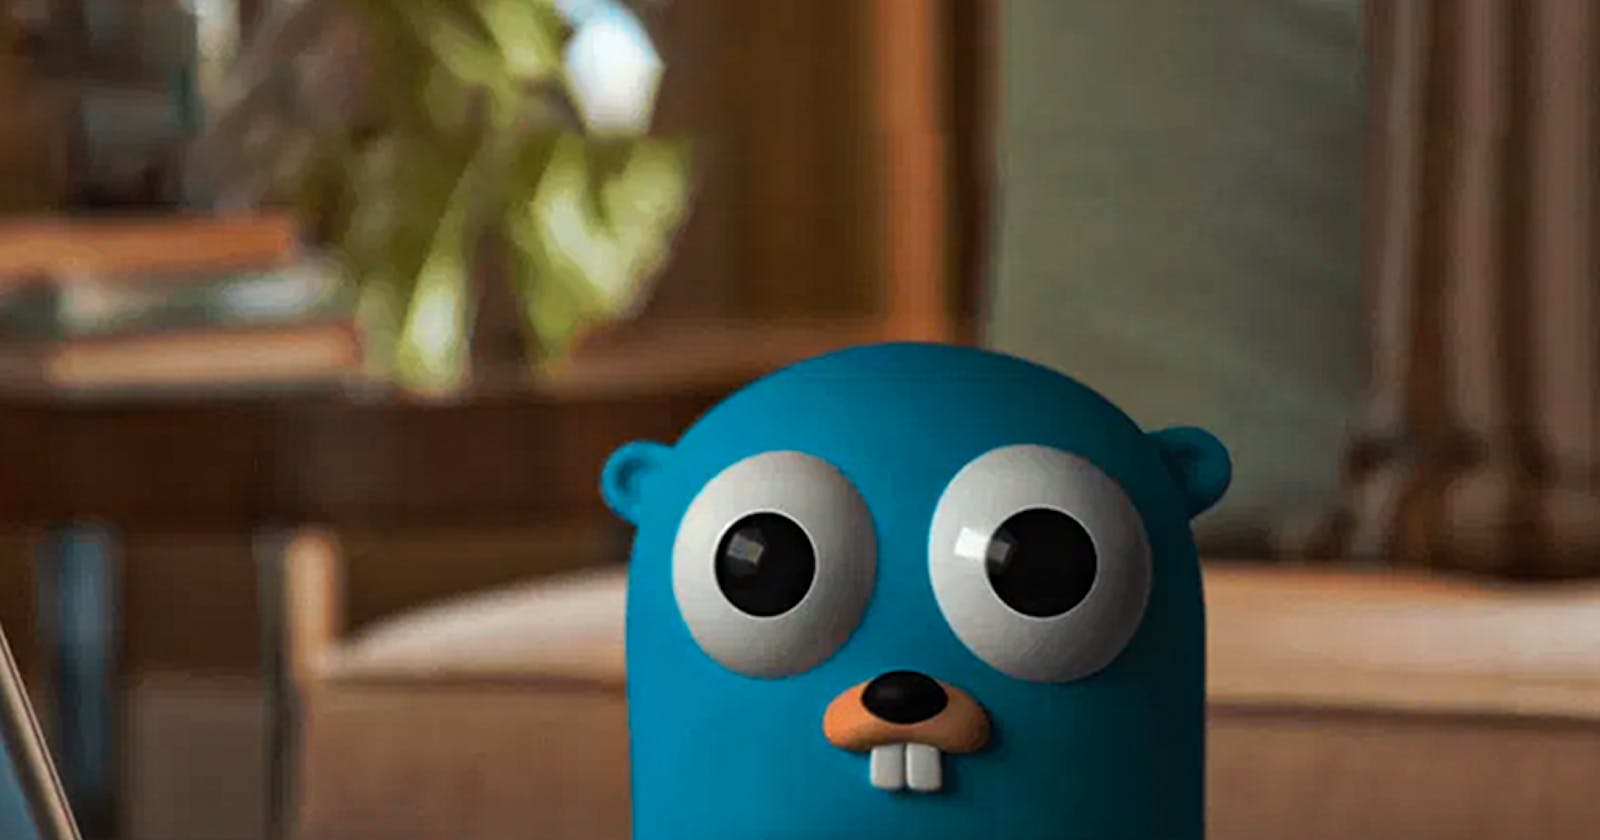 GoLang: Why it is my favorite language now